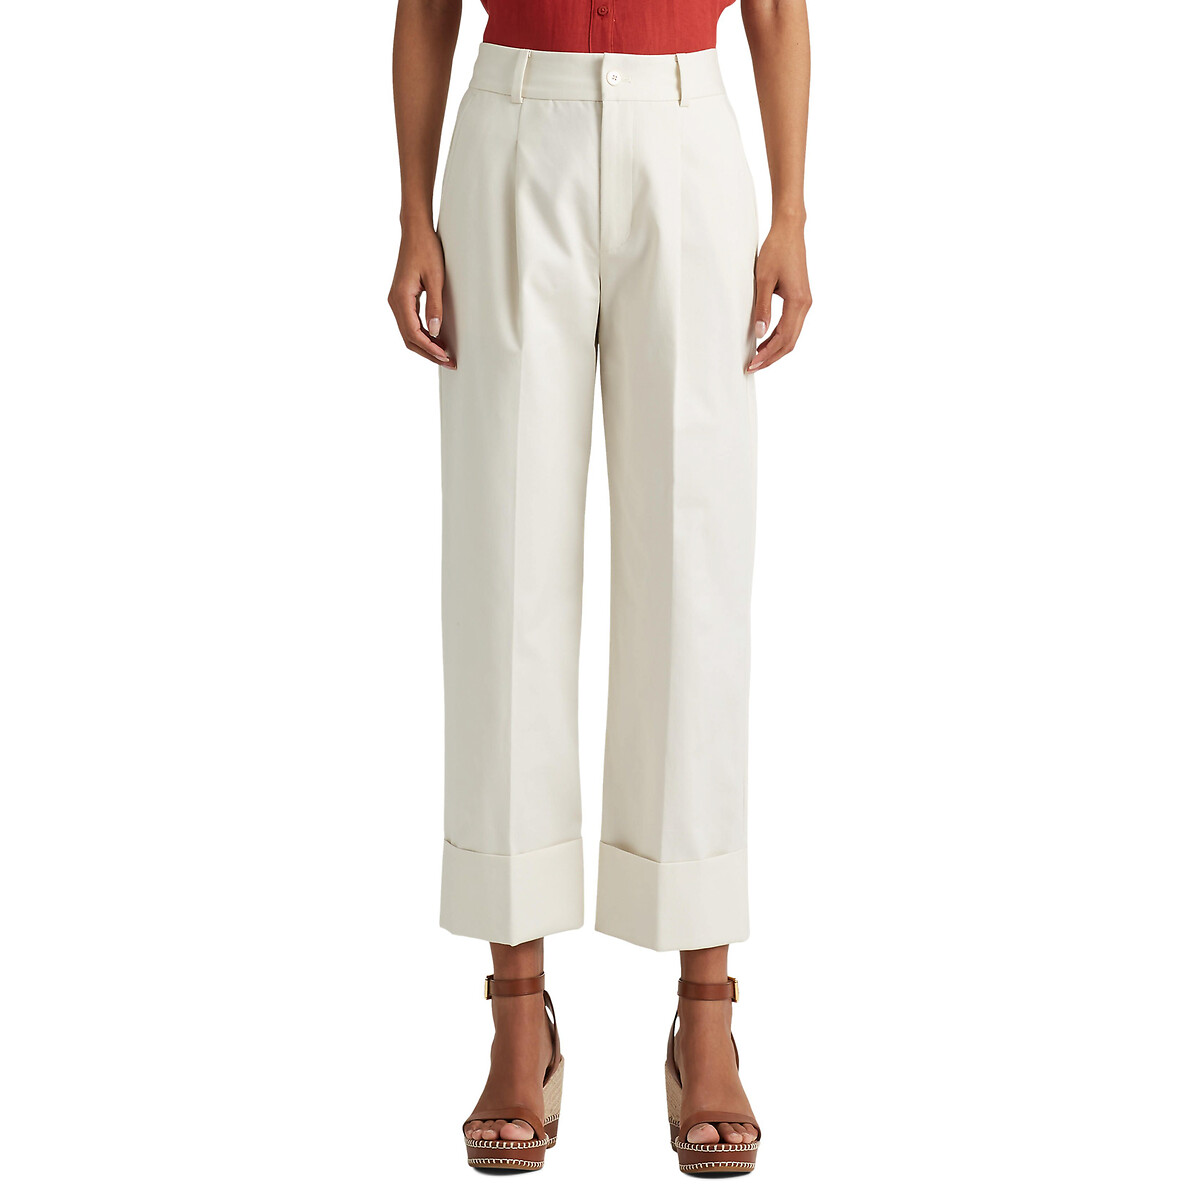 Zeeya Cotton Straight Trousers with Pleat Front